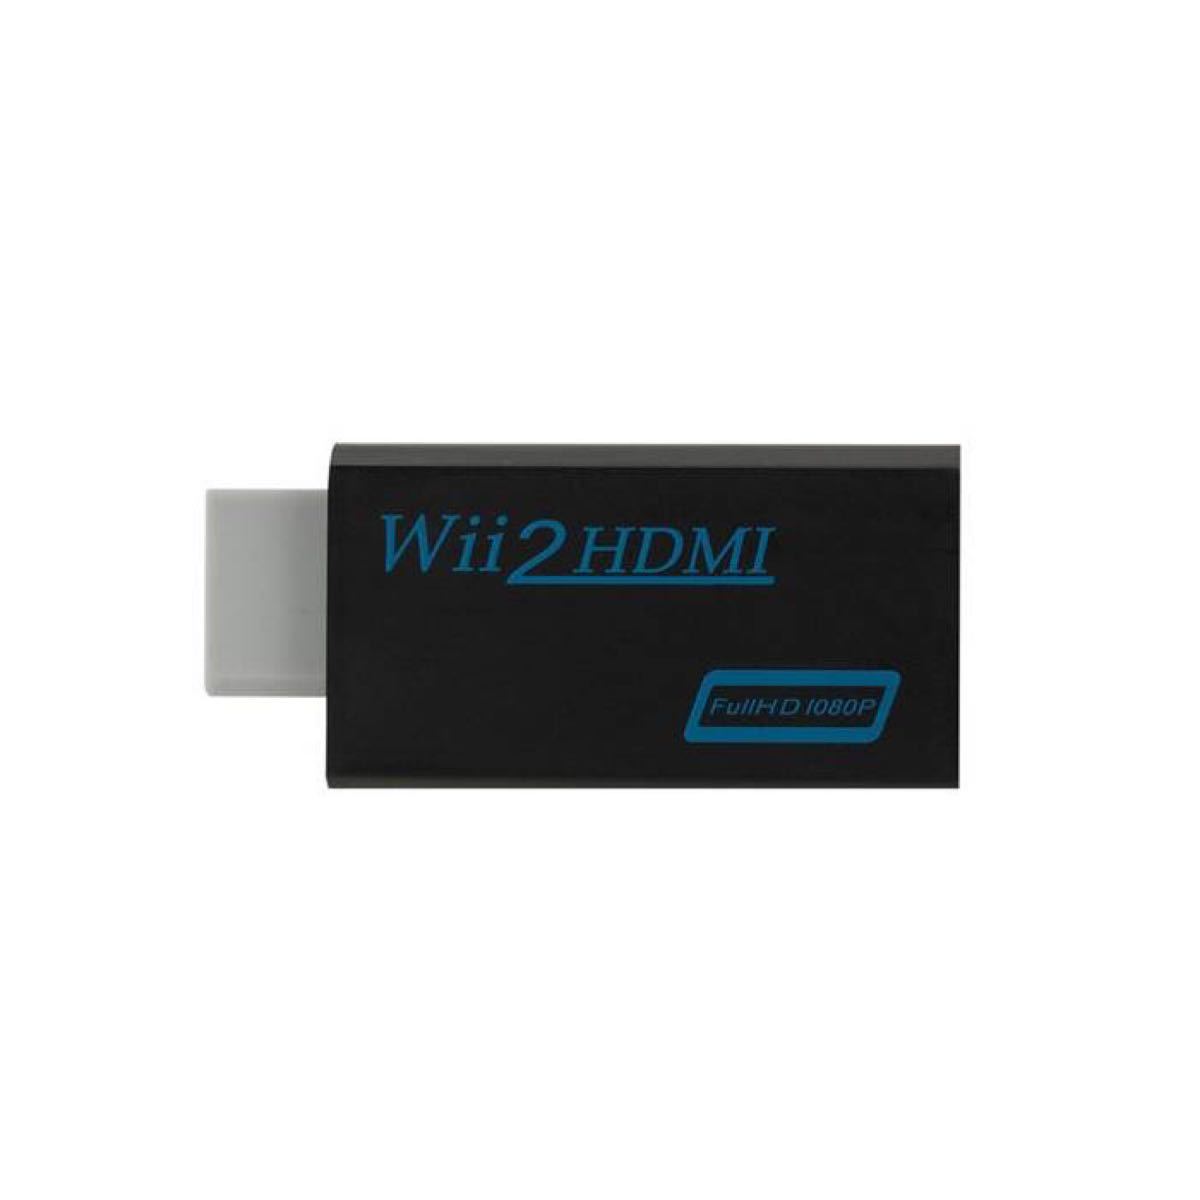 Wii to HDMI 変換アダプター　黒　Wii変換